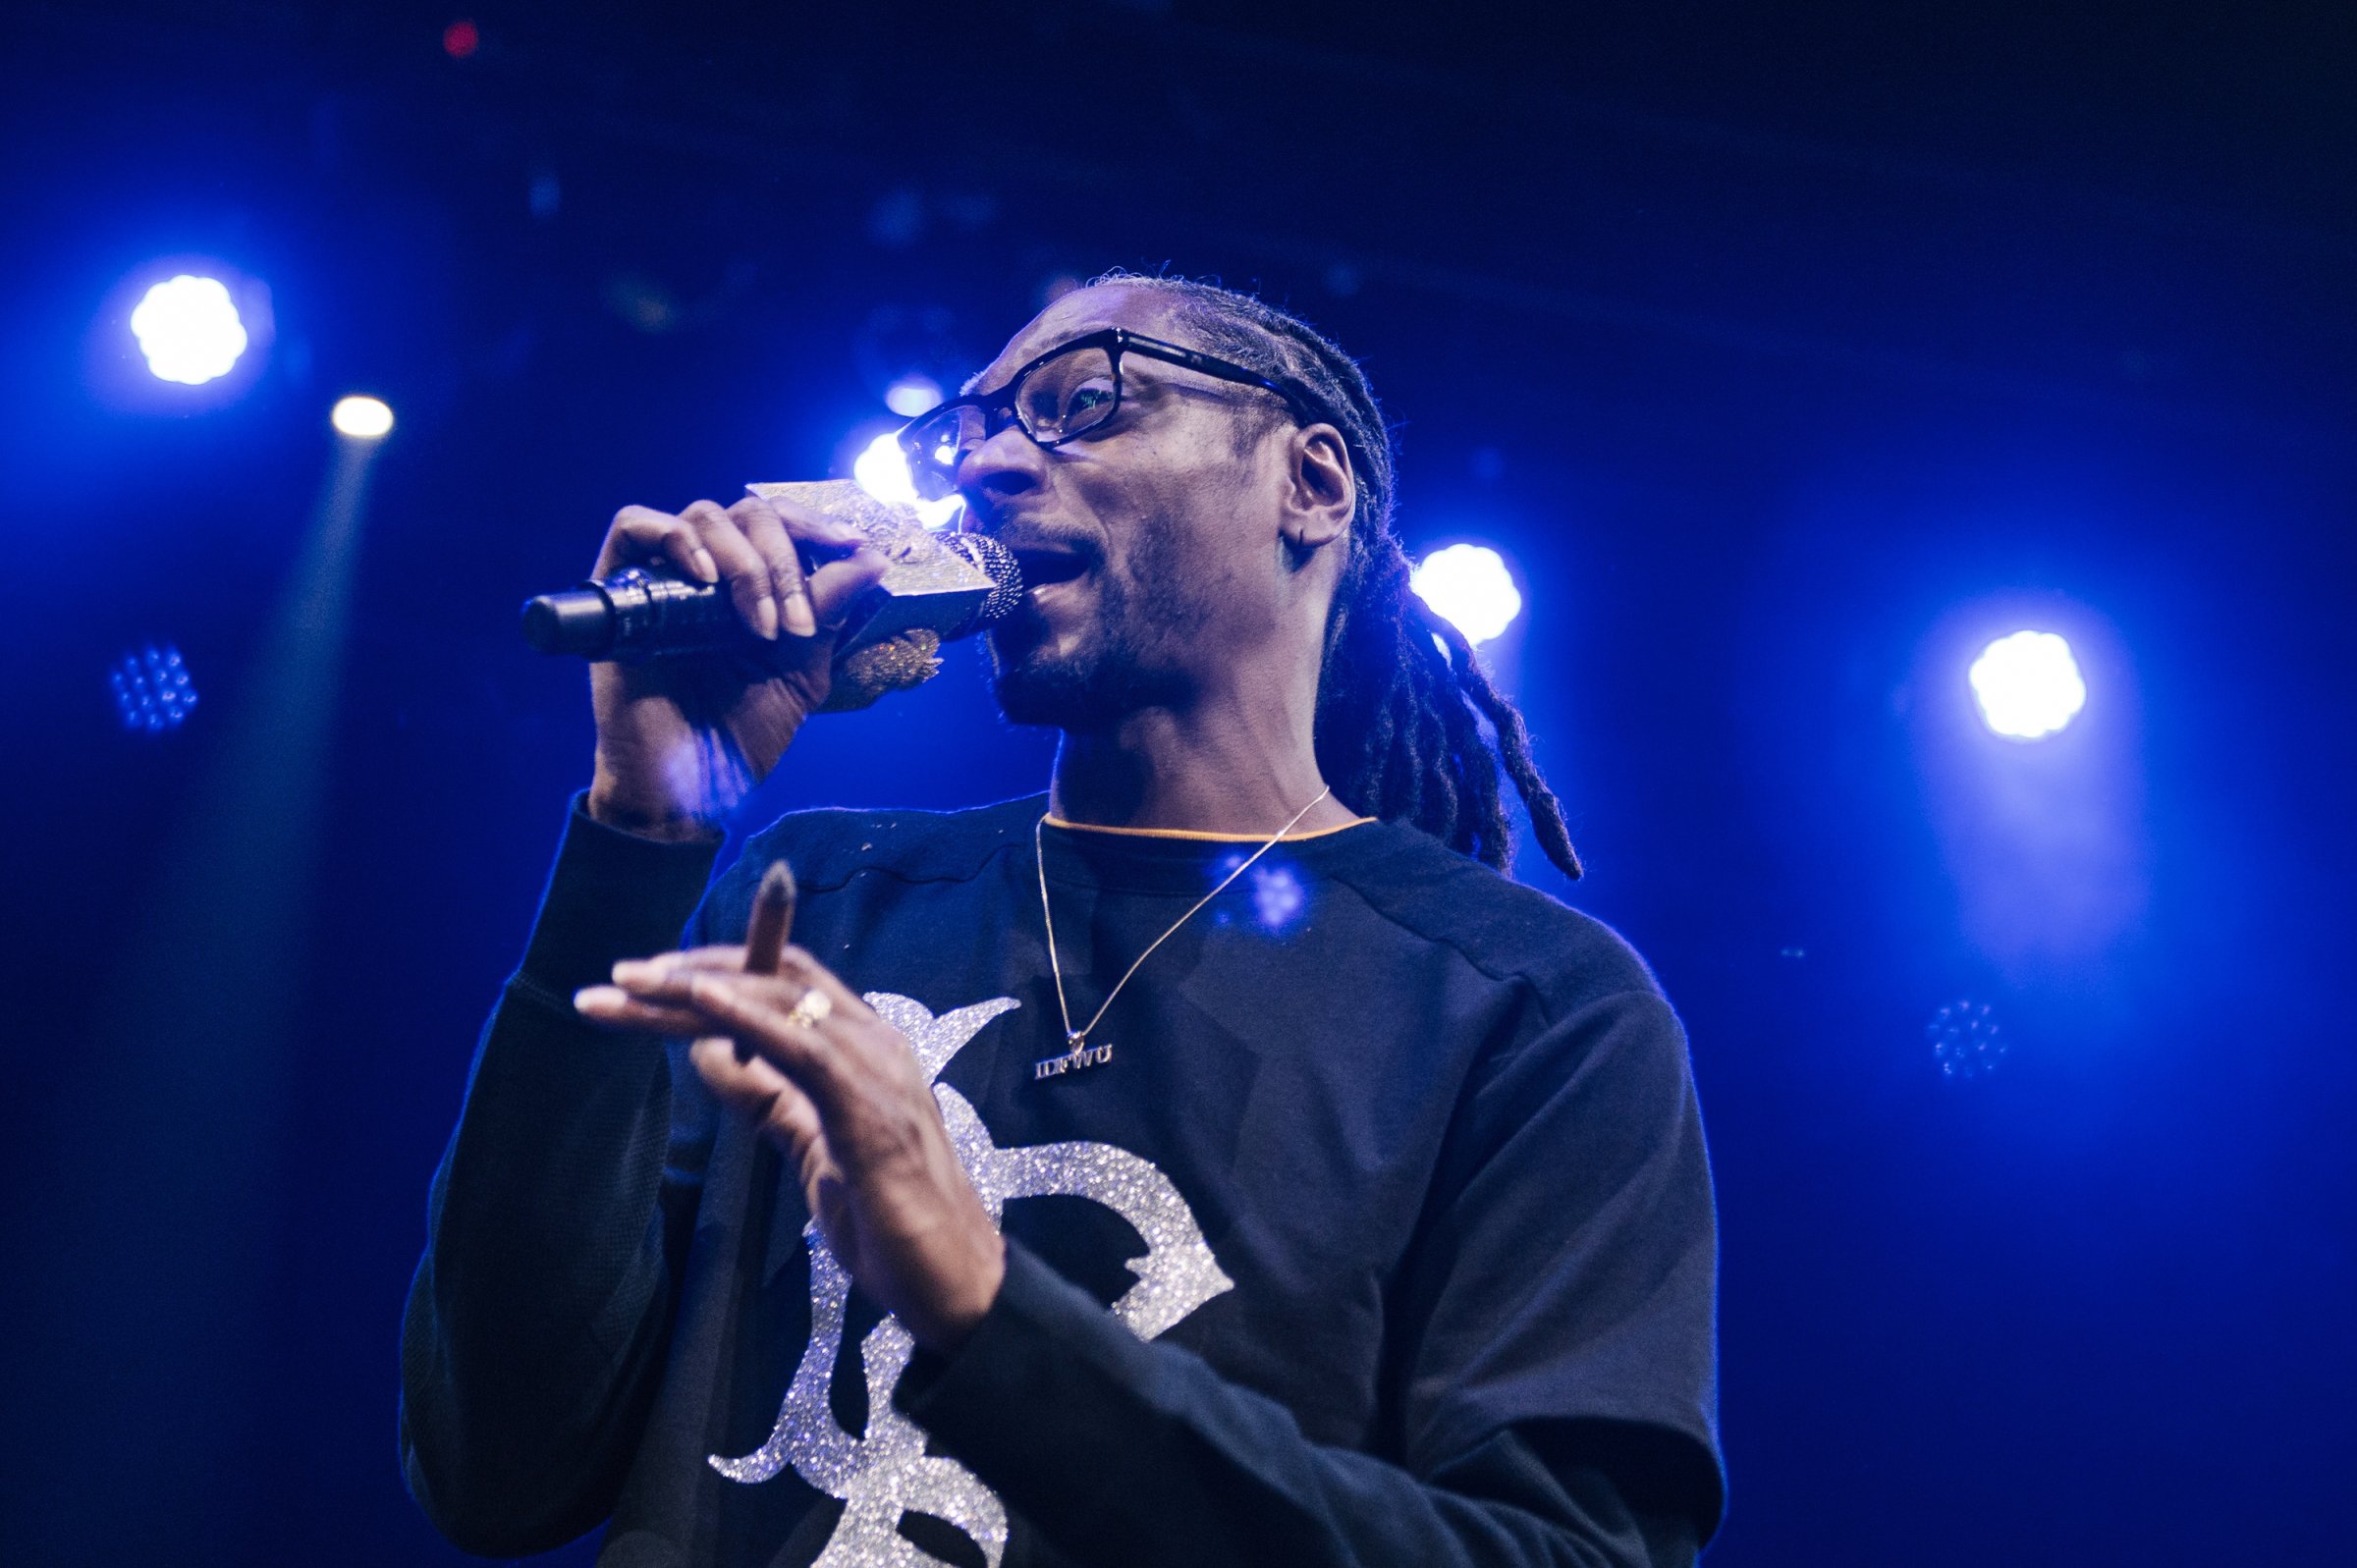 Snoop Dogg performs onstage at the Belasco Theatre on December 19, 2015 in Los Angeles, California.